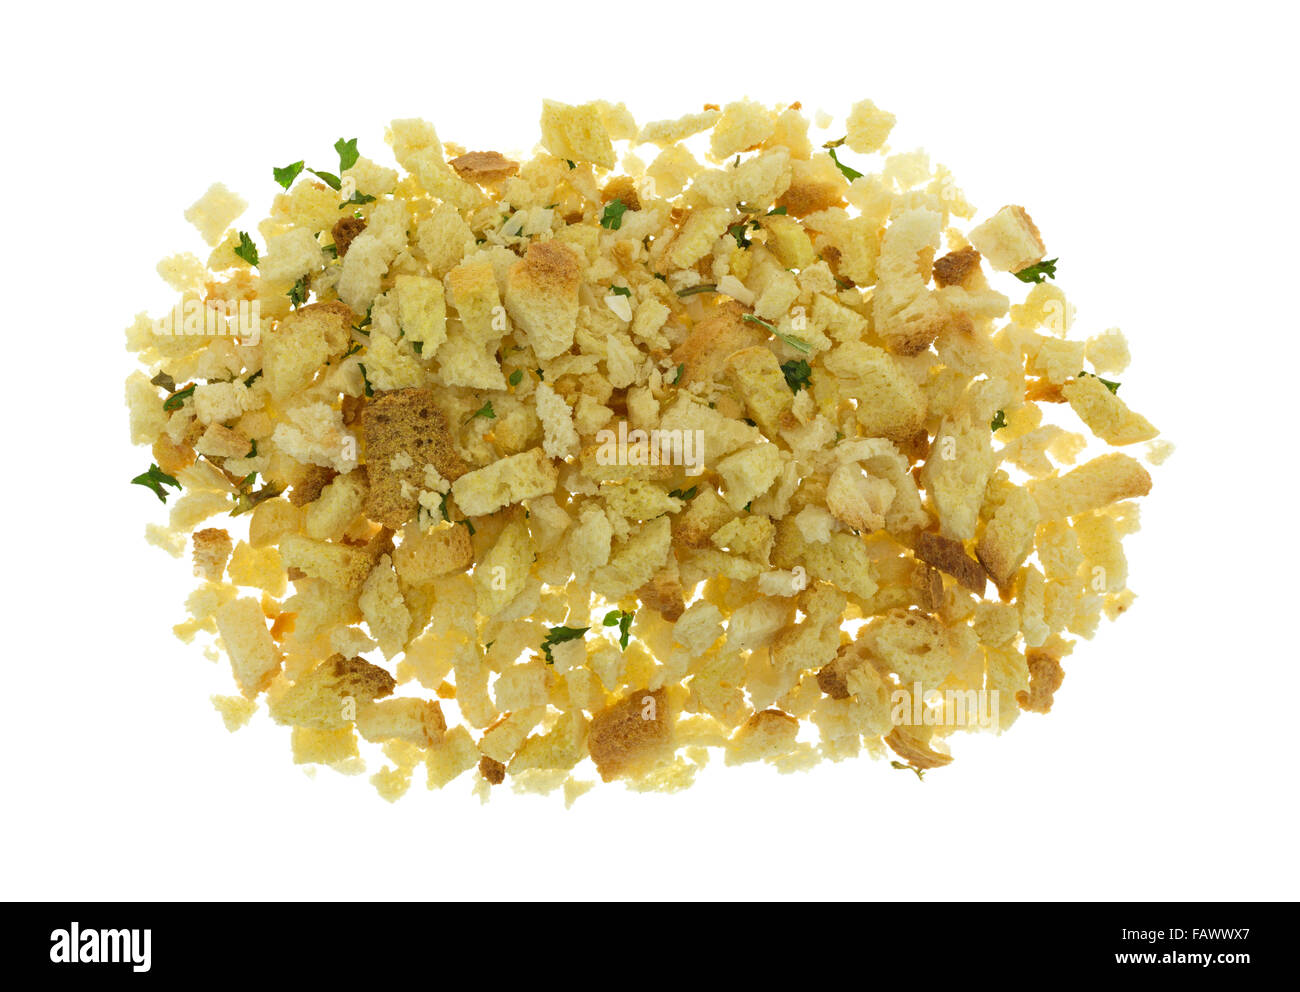 Top view of a portion of crumbled dry stuffing mix isolated on a white background. Stock Photo